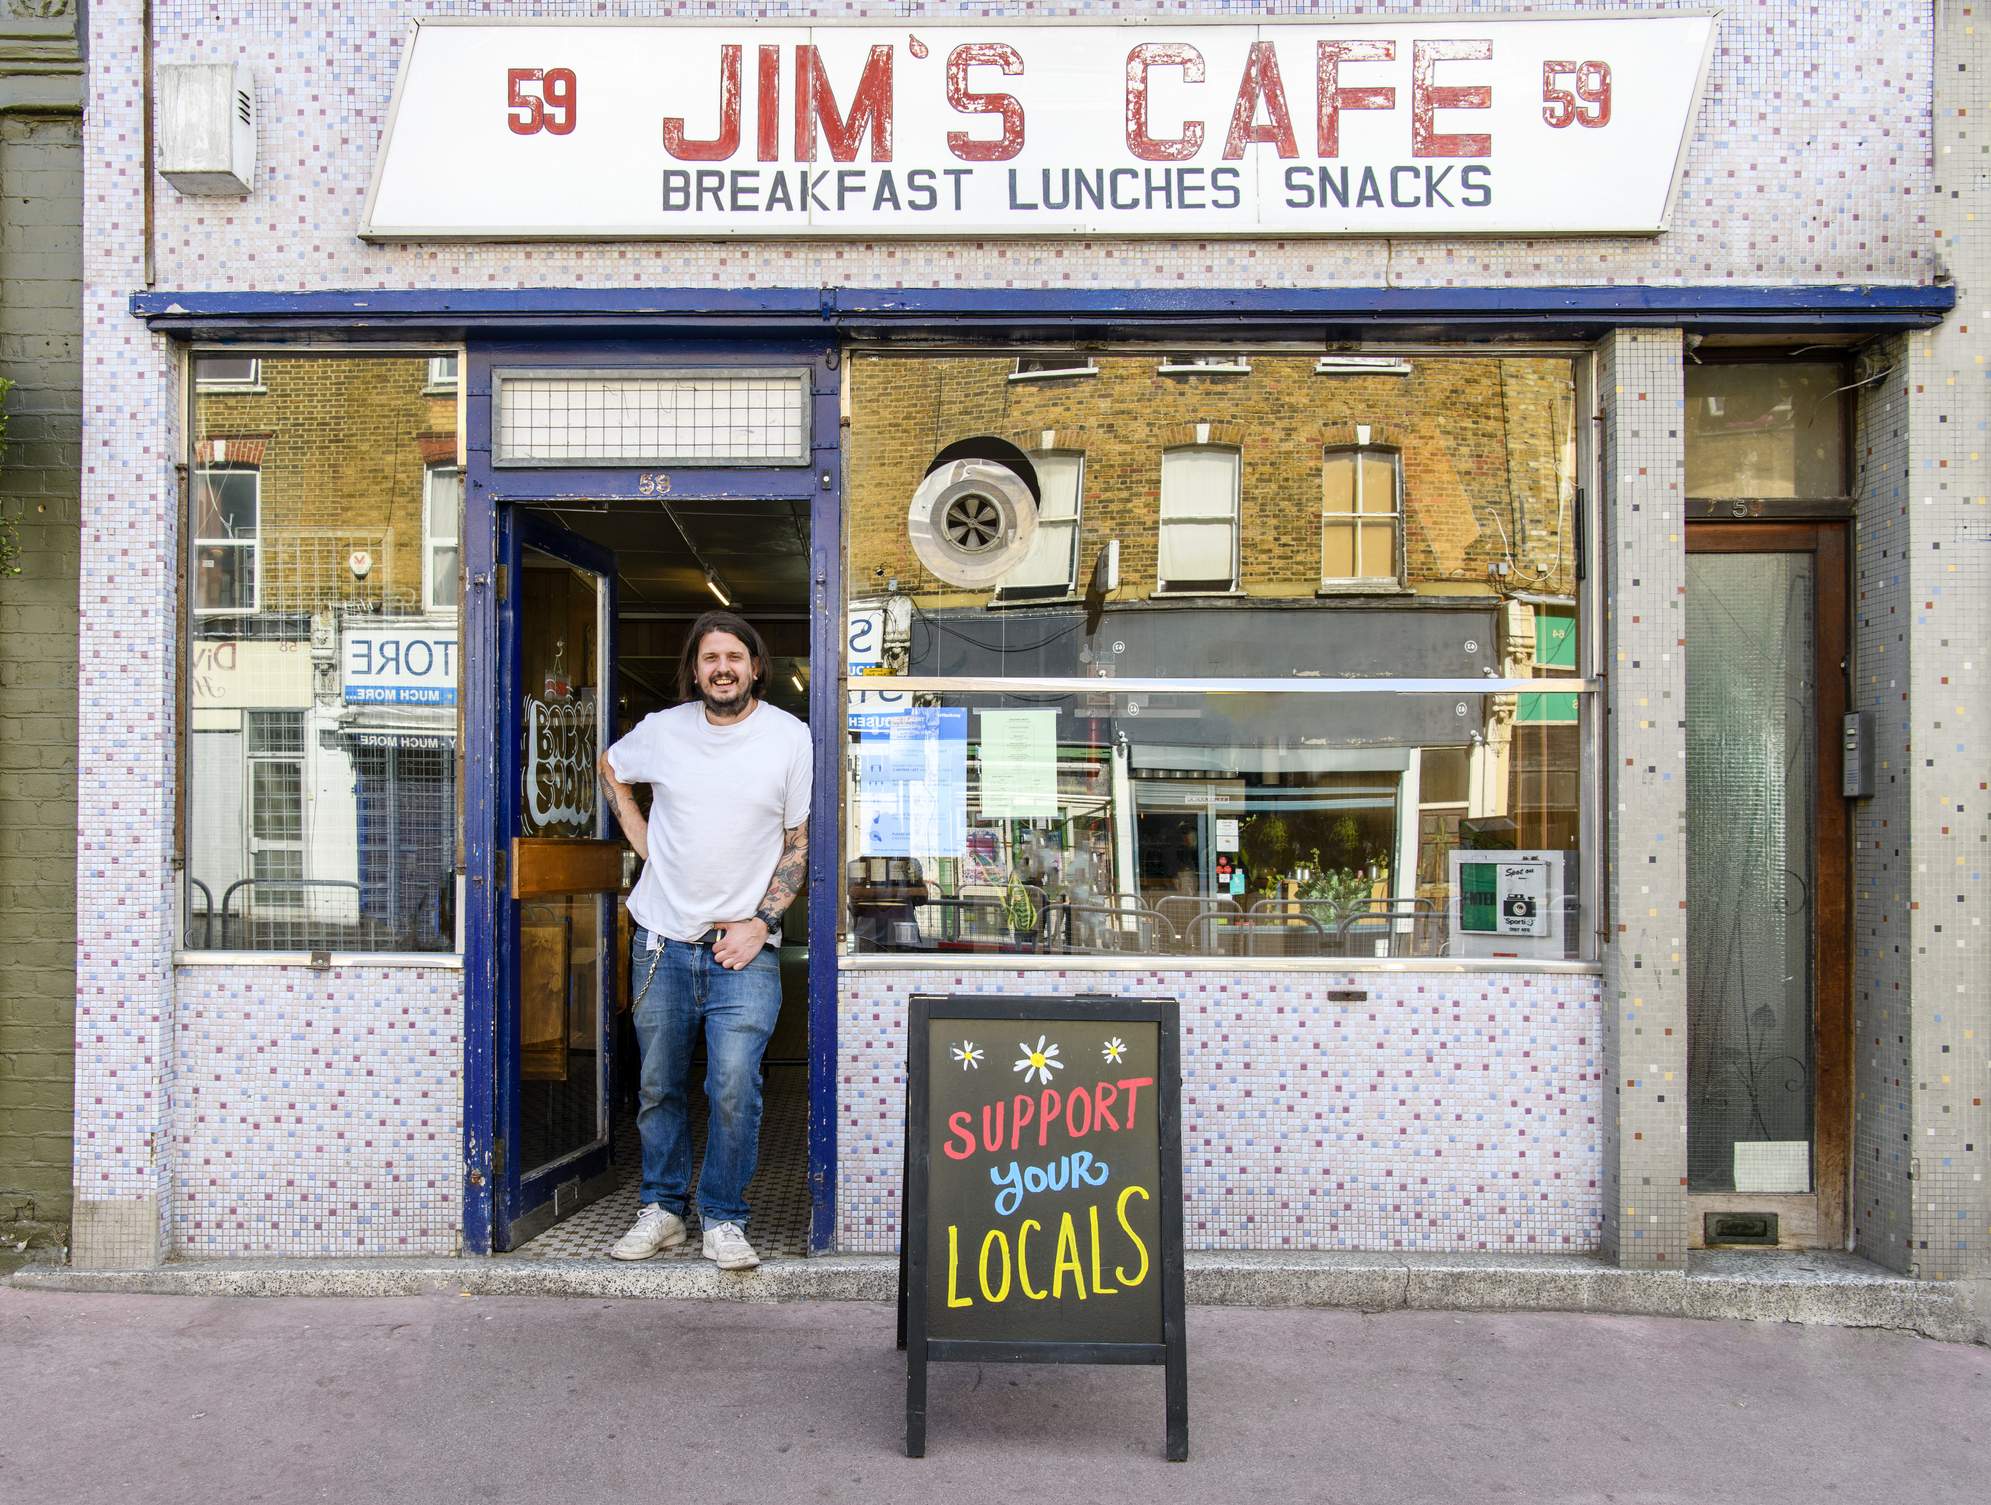 Image depicts a person wearing a white shirt and jeans standing in the doorway. A sign over the establishment reads “Jim’s Cafe, breakfast, lunch, snacks.” There are two large windows and the front is tiled with mosaic. A kick sign out front reads “support your locals.”